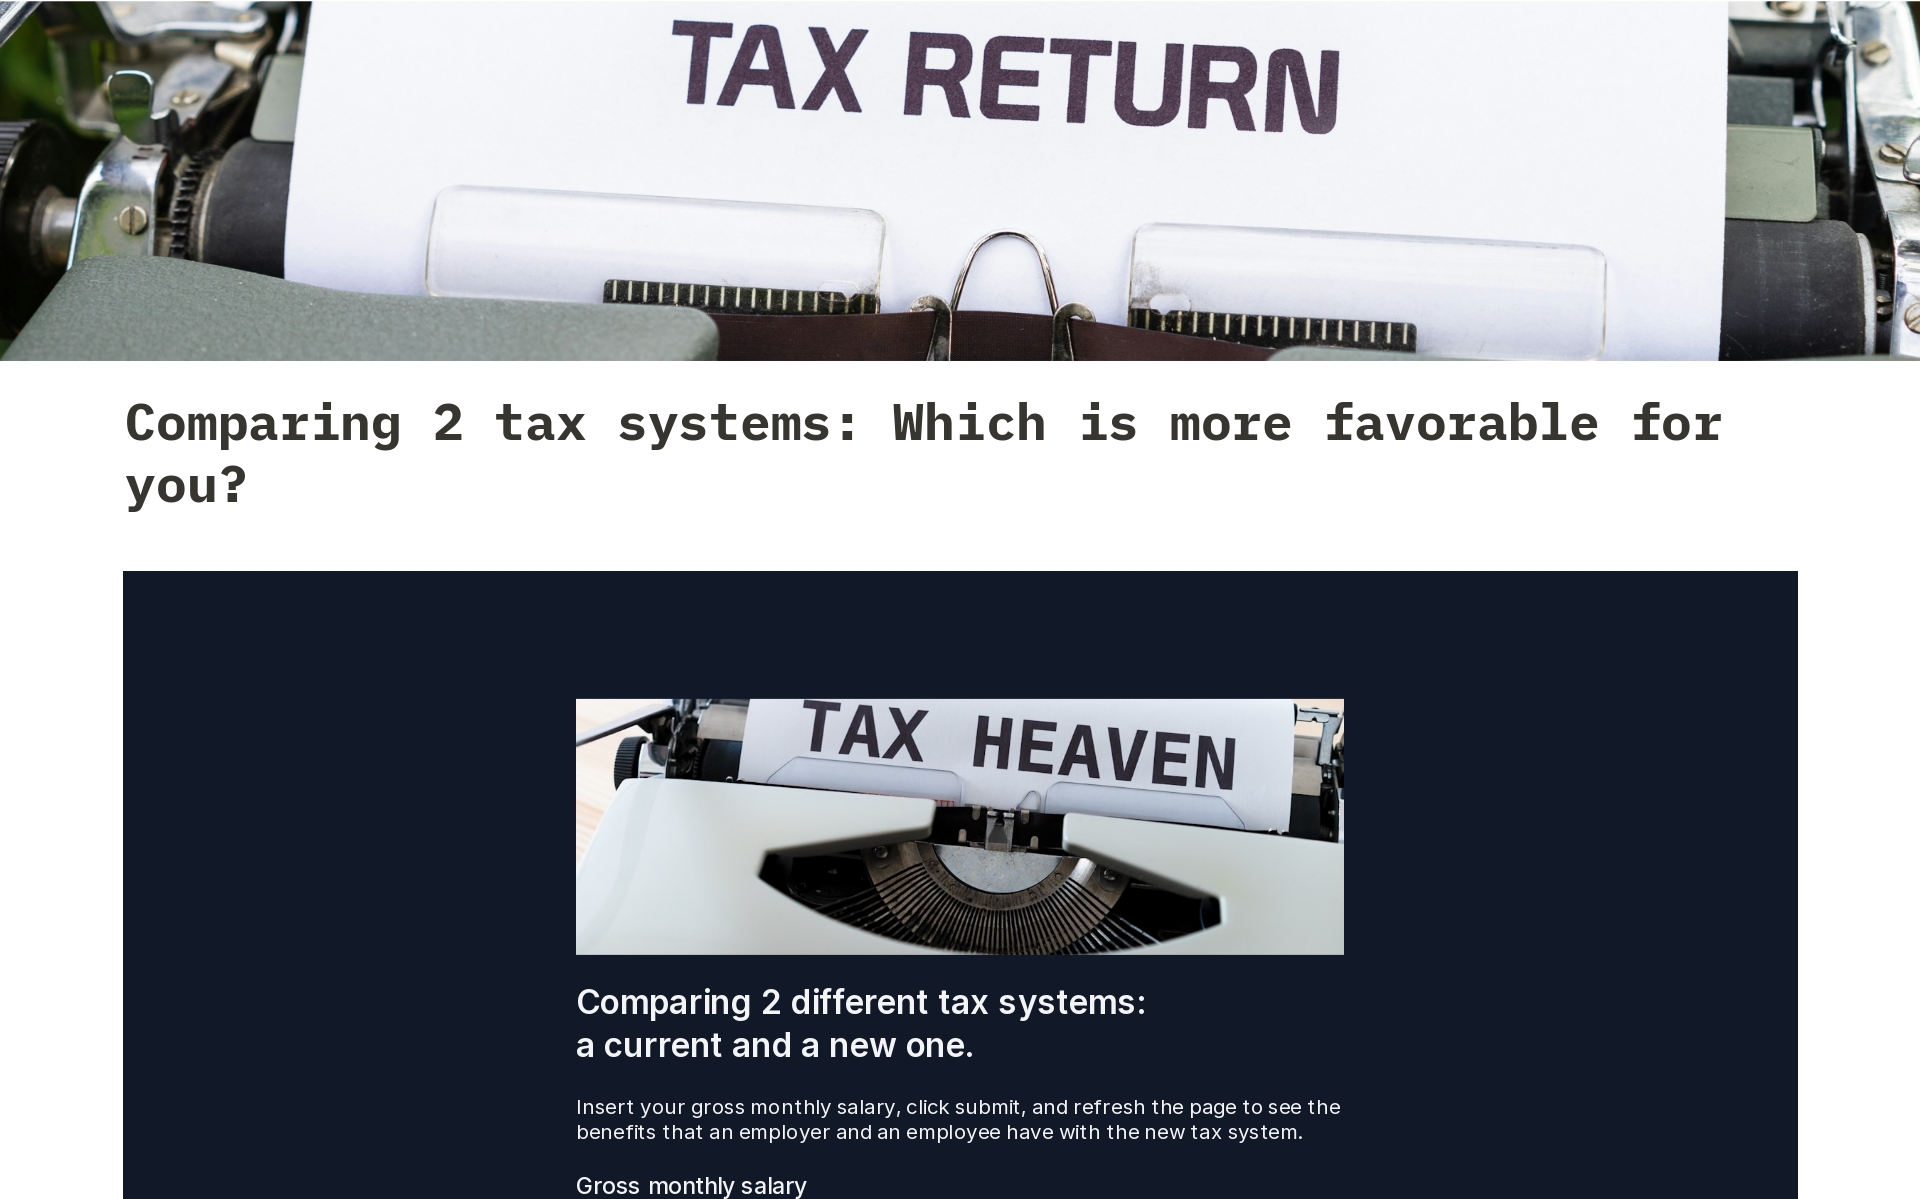 Comparing 2 different tax systems: a current and a new one.
Insert your gross monthly salary, click submit, and refresh the page to see the benefits that an employer and an employee have with the new tax system.